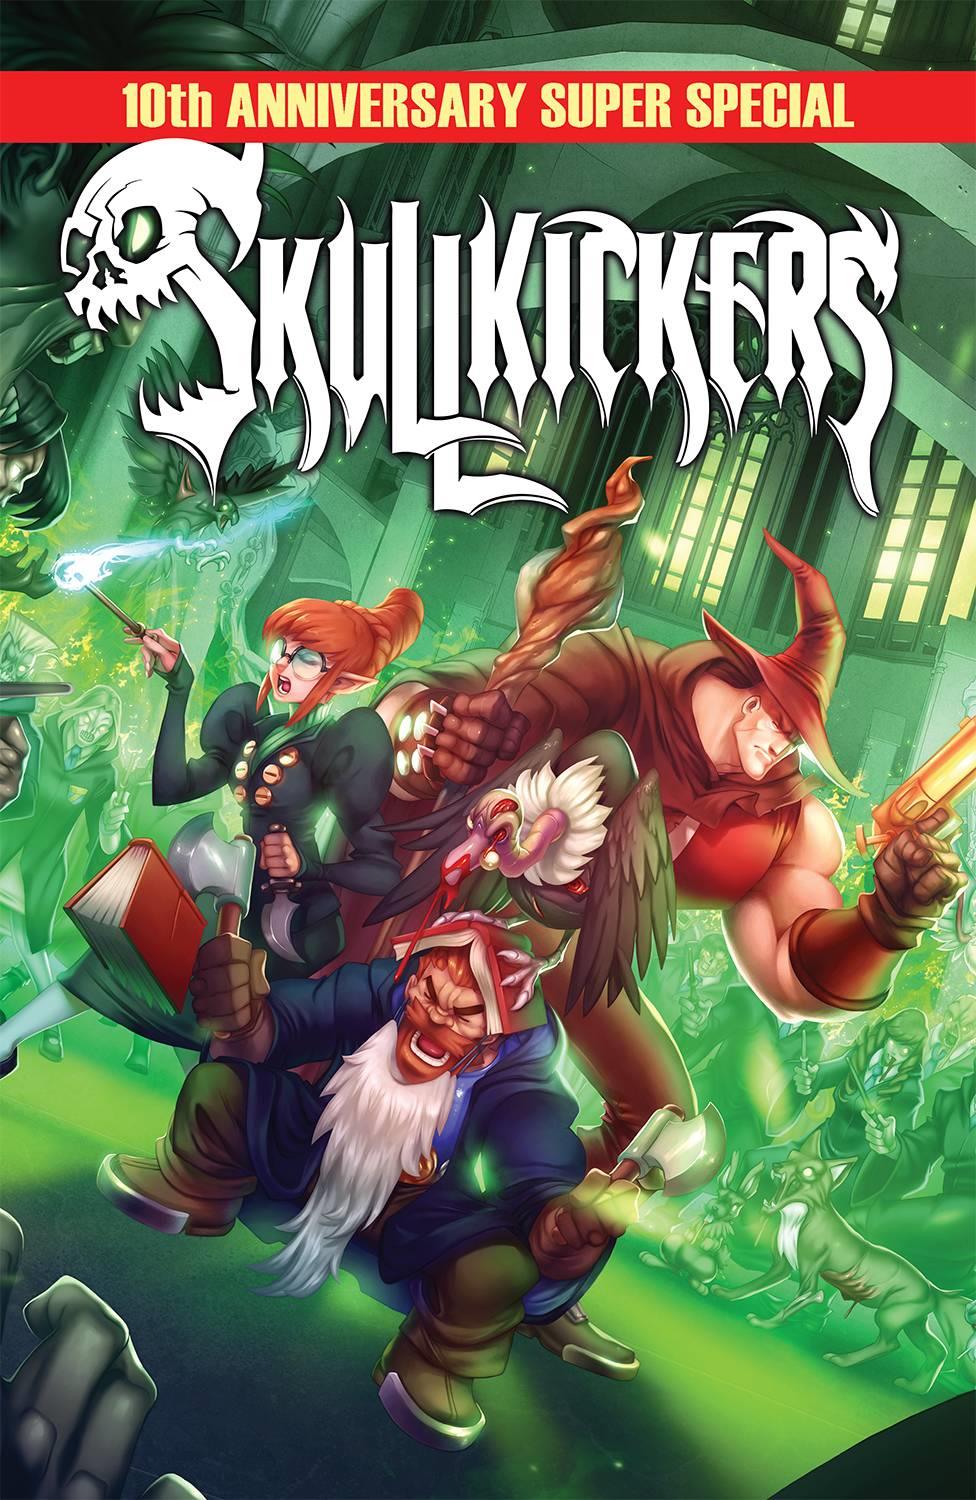 Skullkickers Super Special #1 (one-shot Annv Special) Image Comics Comic Book